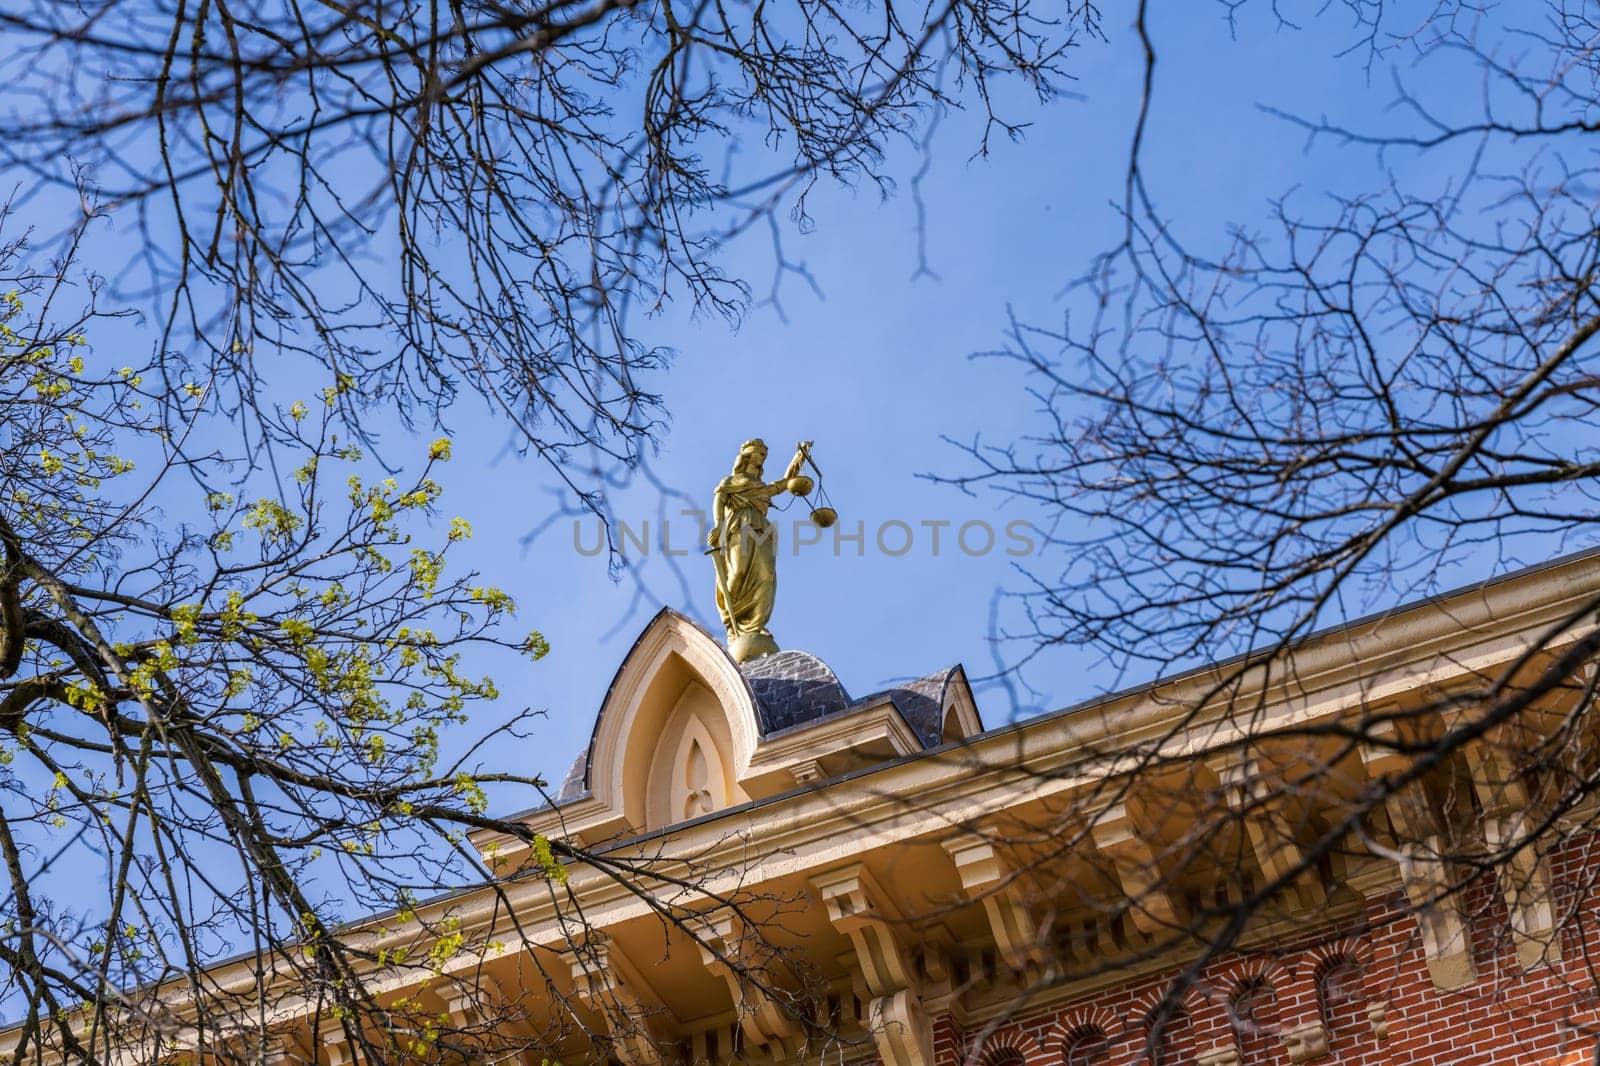 Statue to Lady Justice on the roof of the Delaware County courthouse in Ohio by steheap